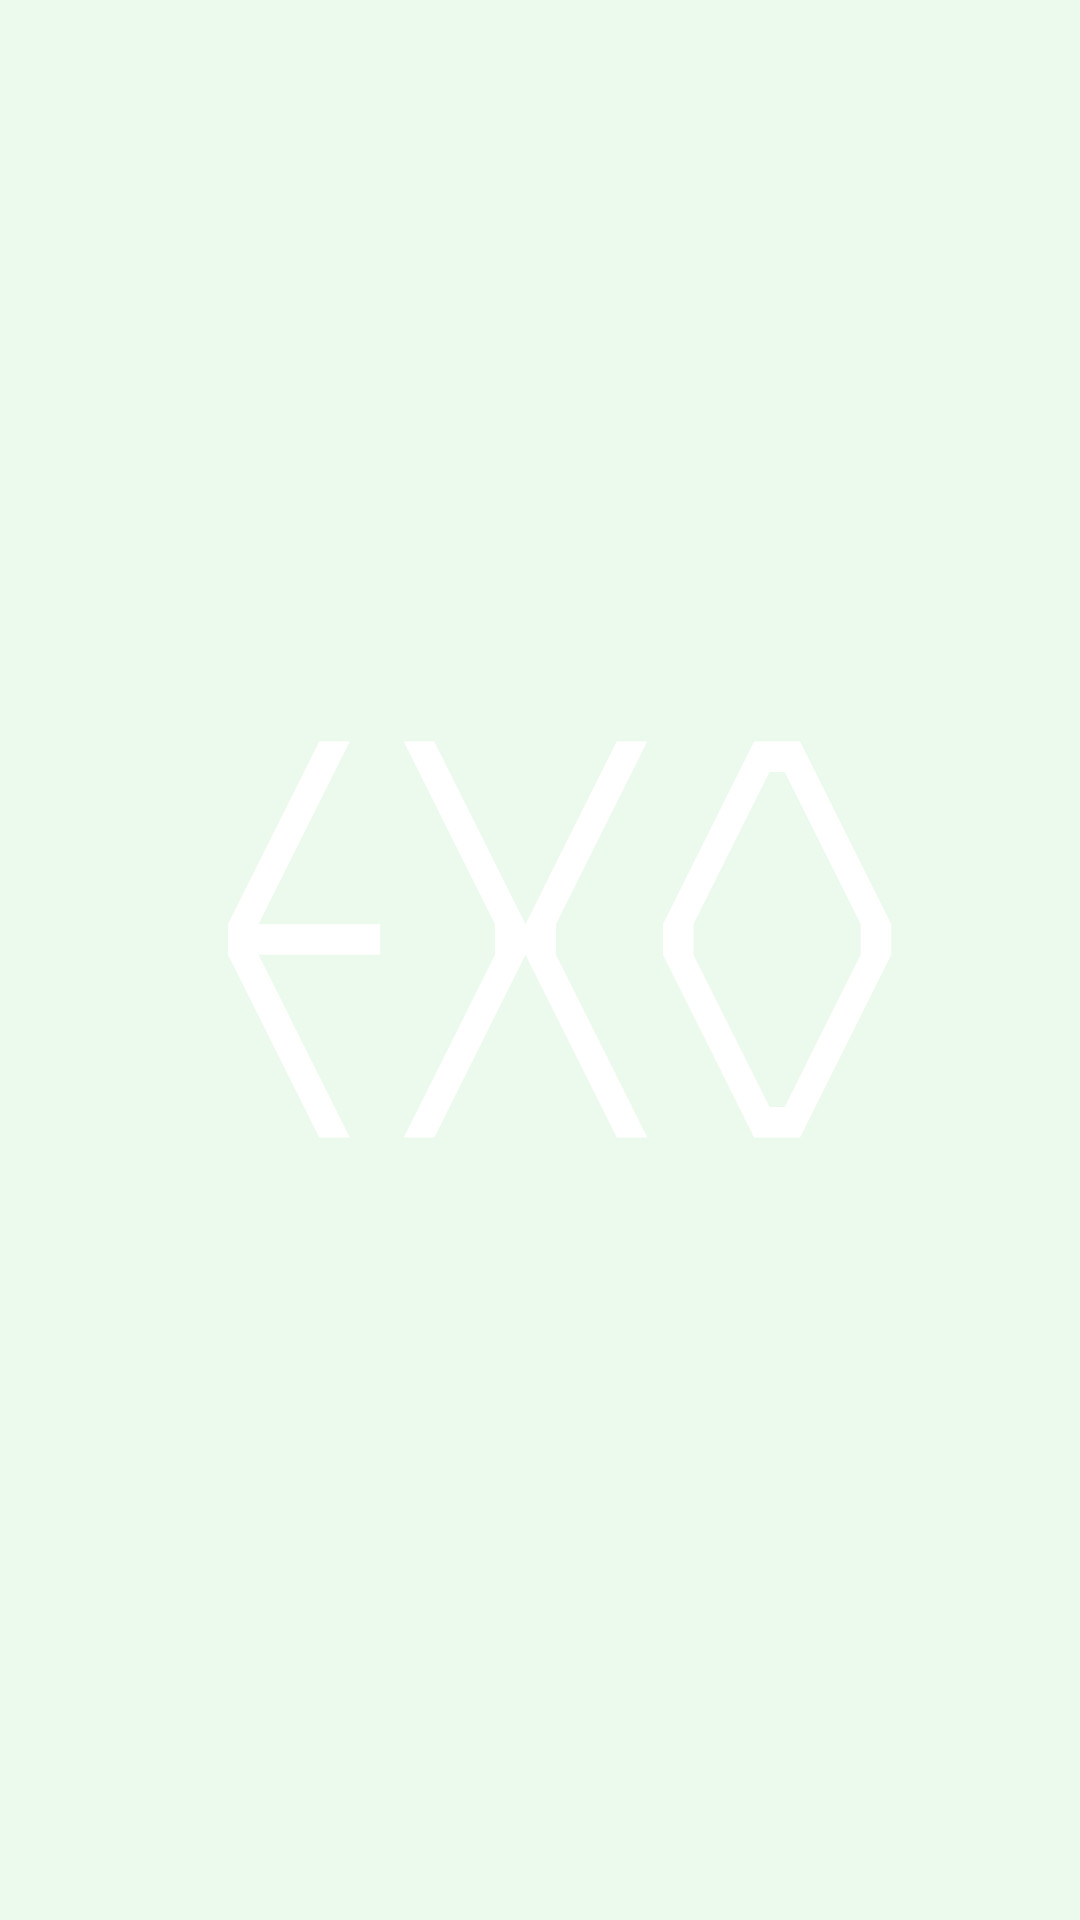 1080x1920 exo logo wallpapers for anon